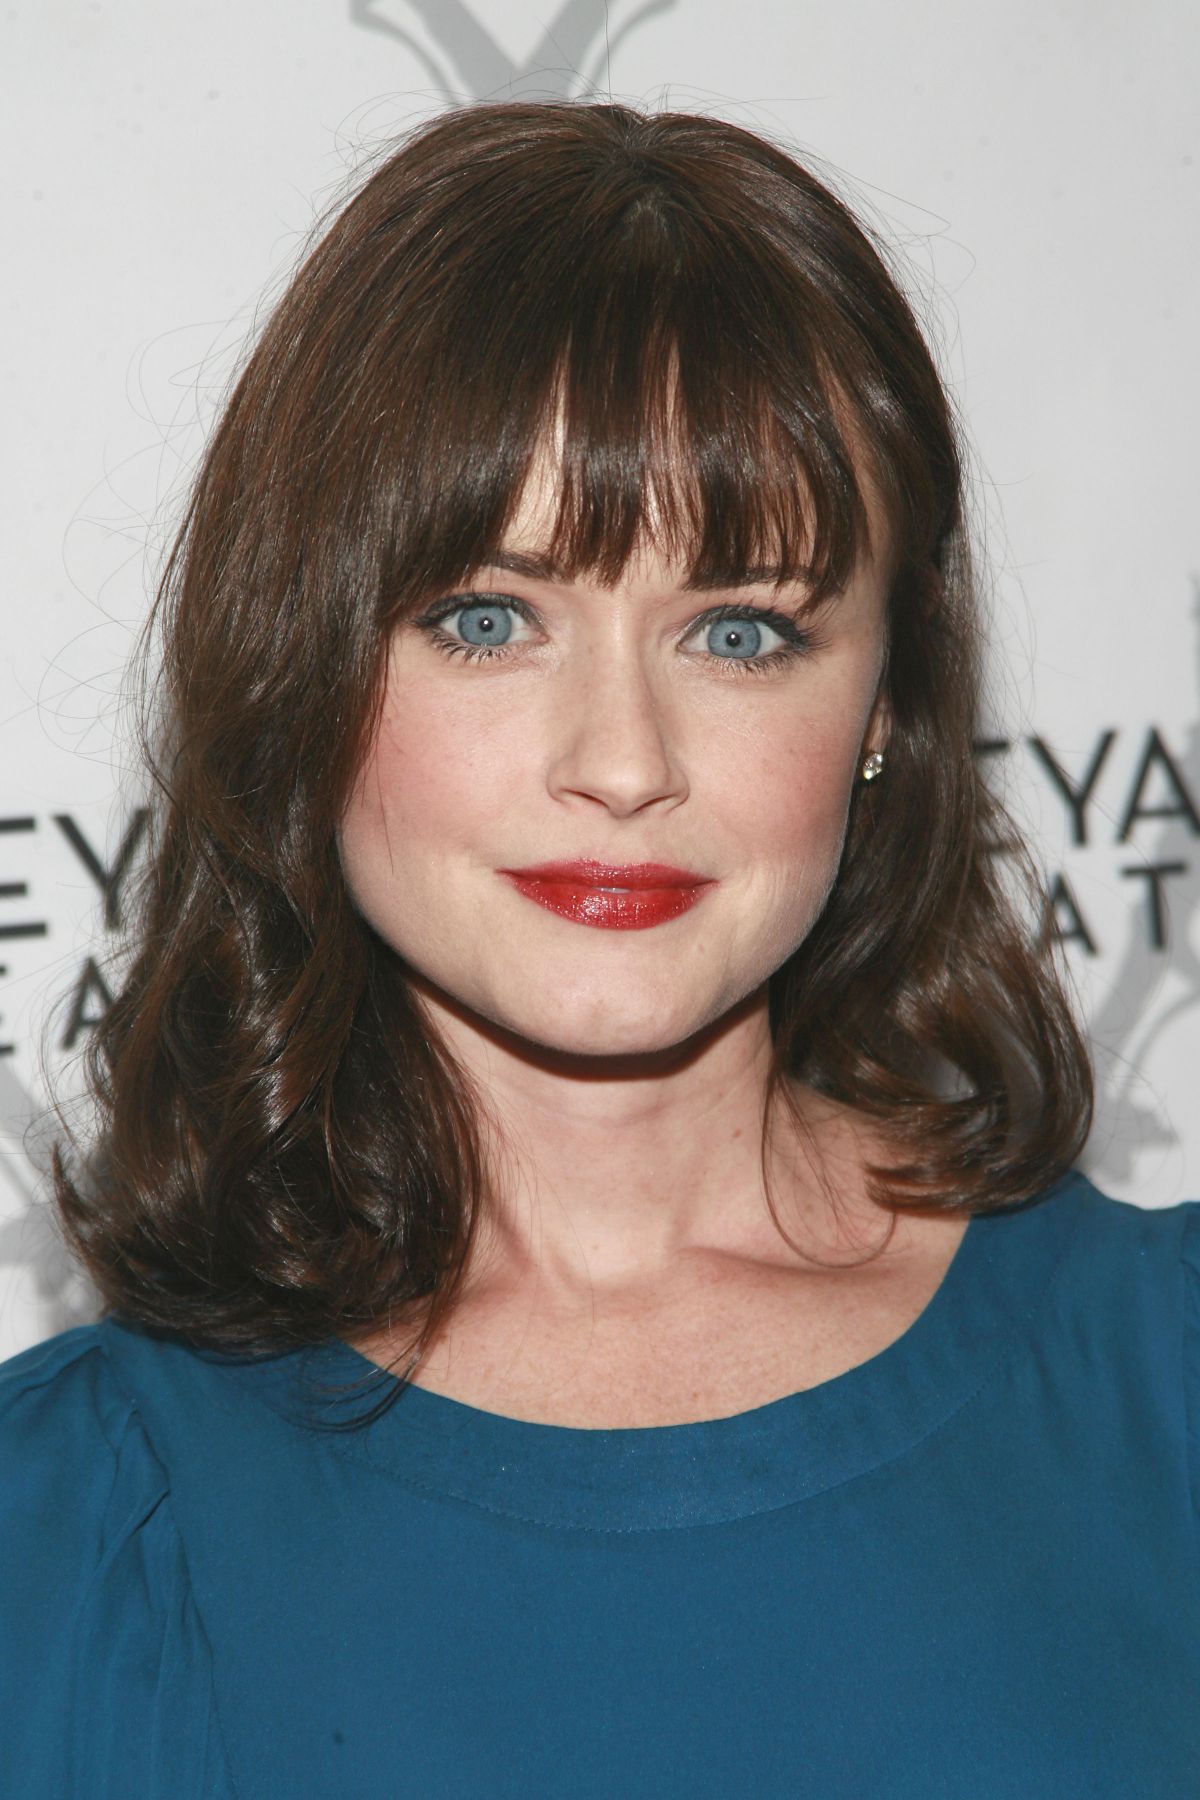 ALEXIS BLEDEL Opening Night Arrivals for Billy and Ray in New York